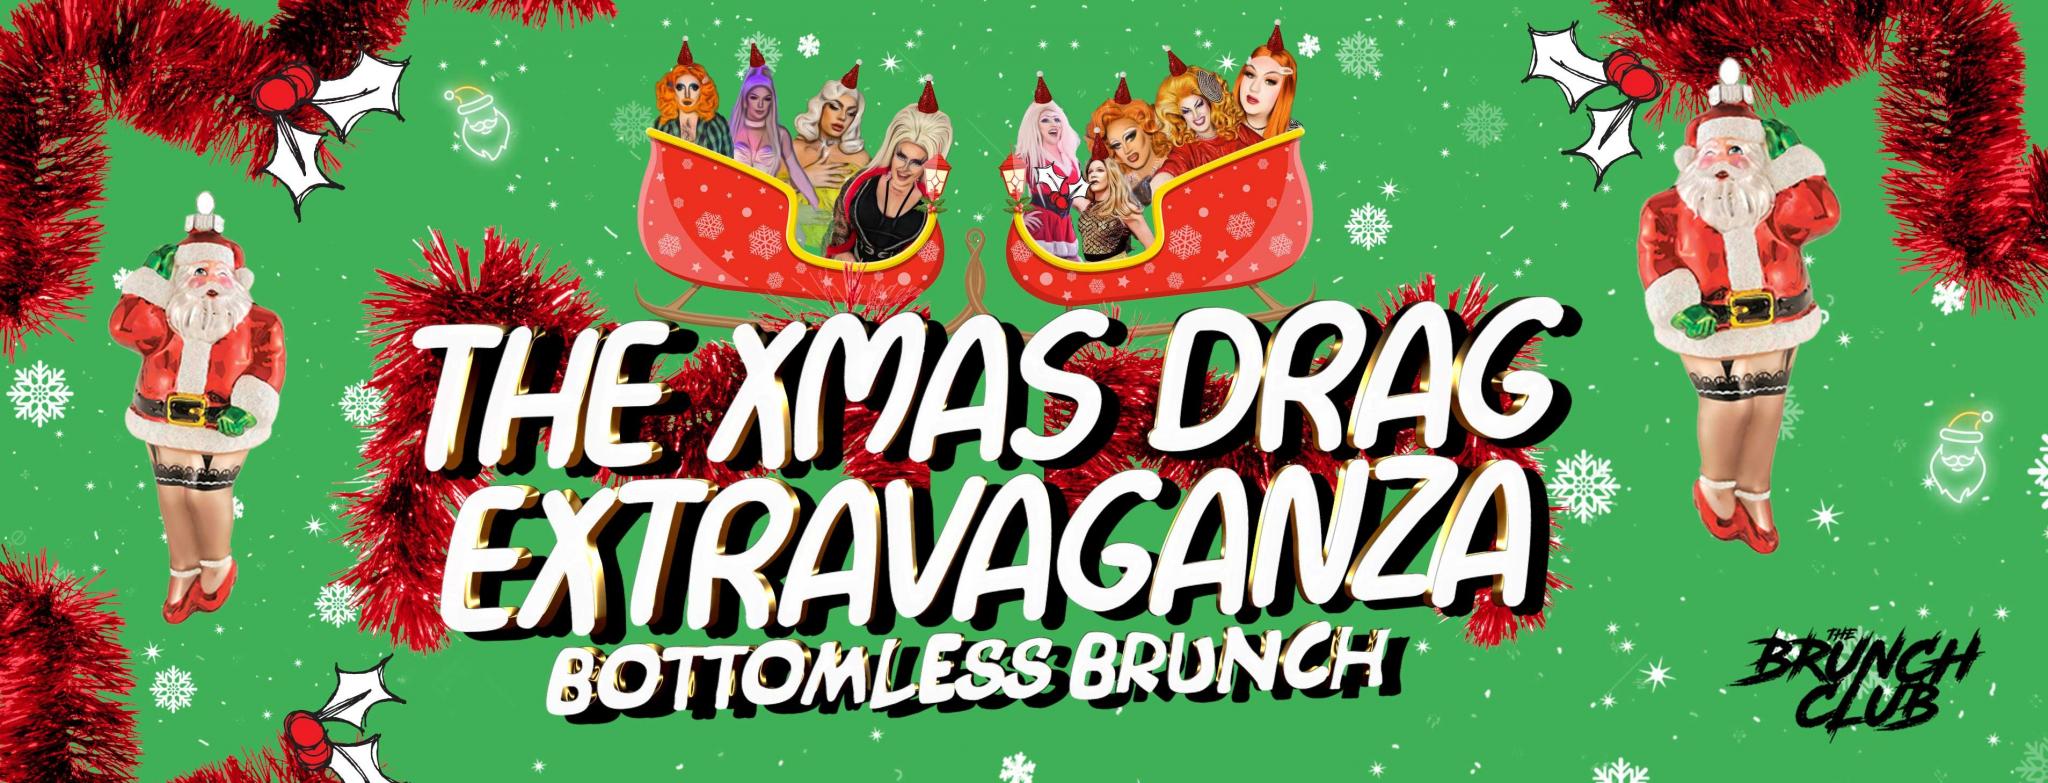 The Xmas Drag Extravaganza Bottomless Brunch - Portsmouth